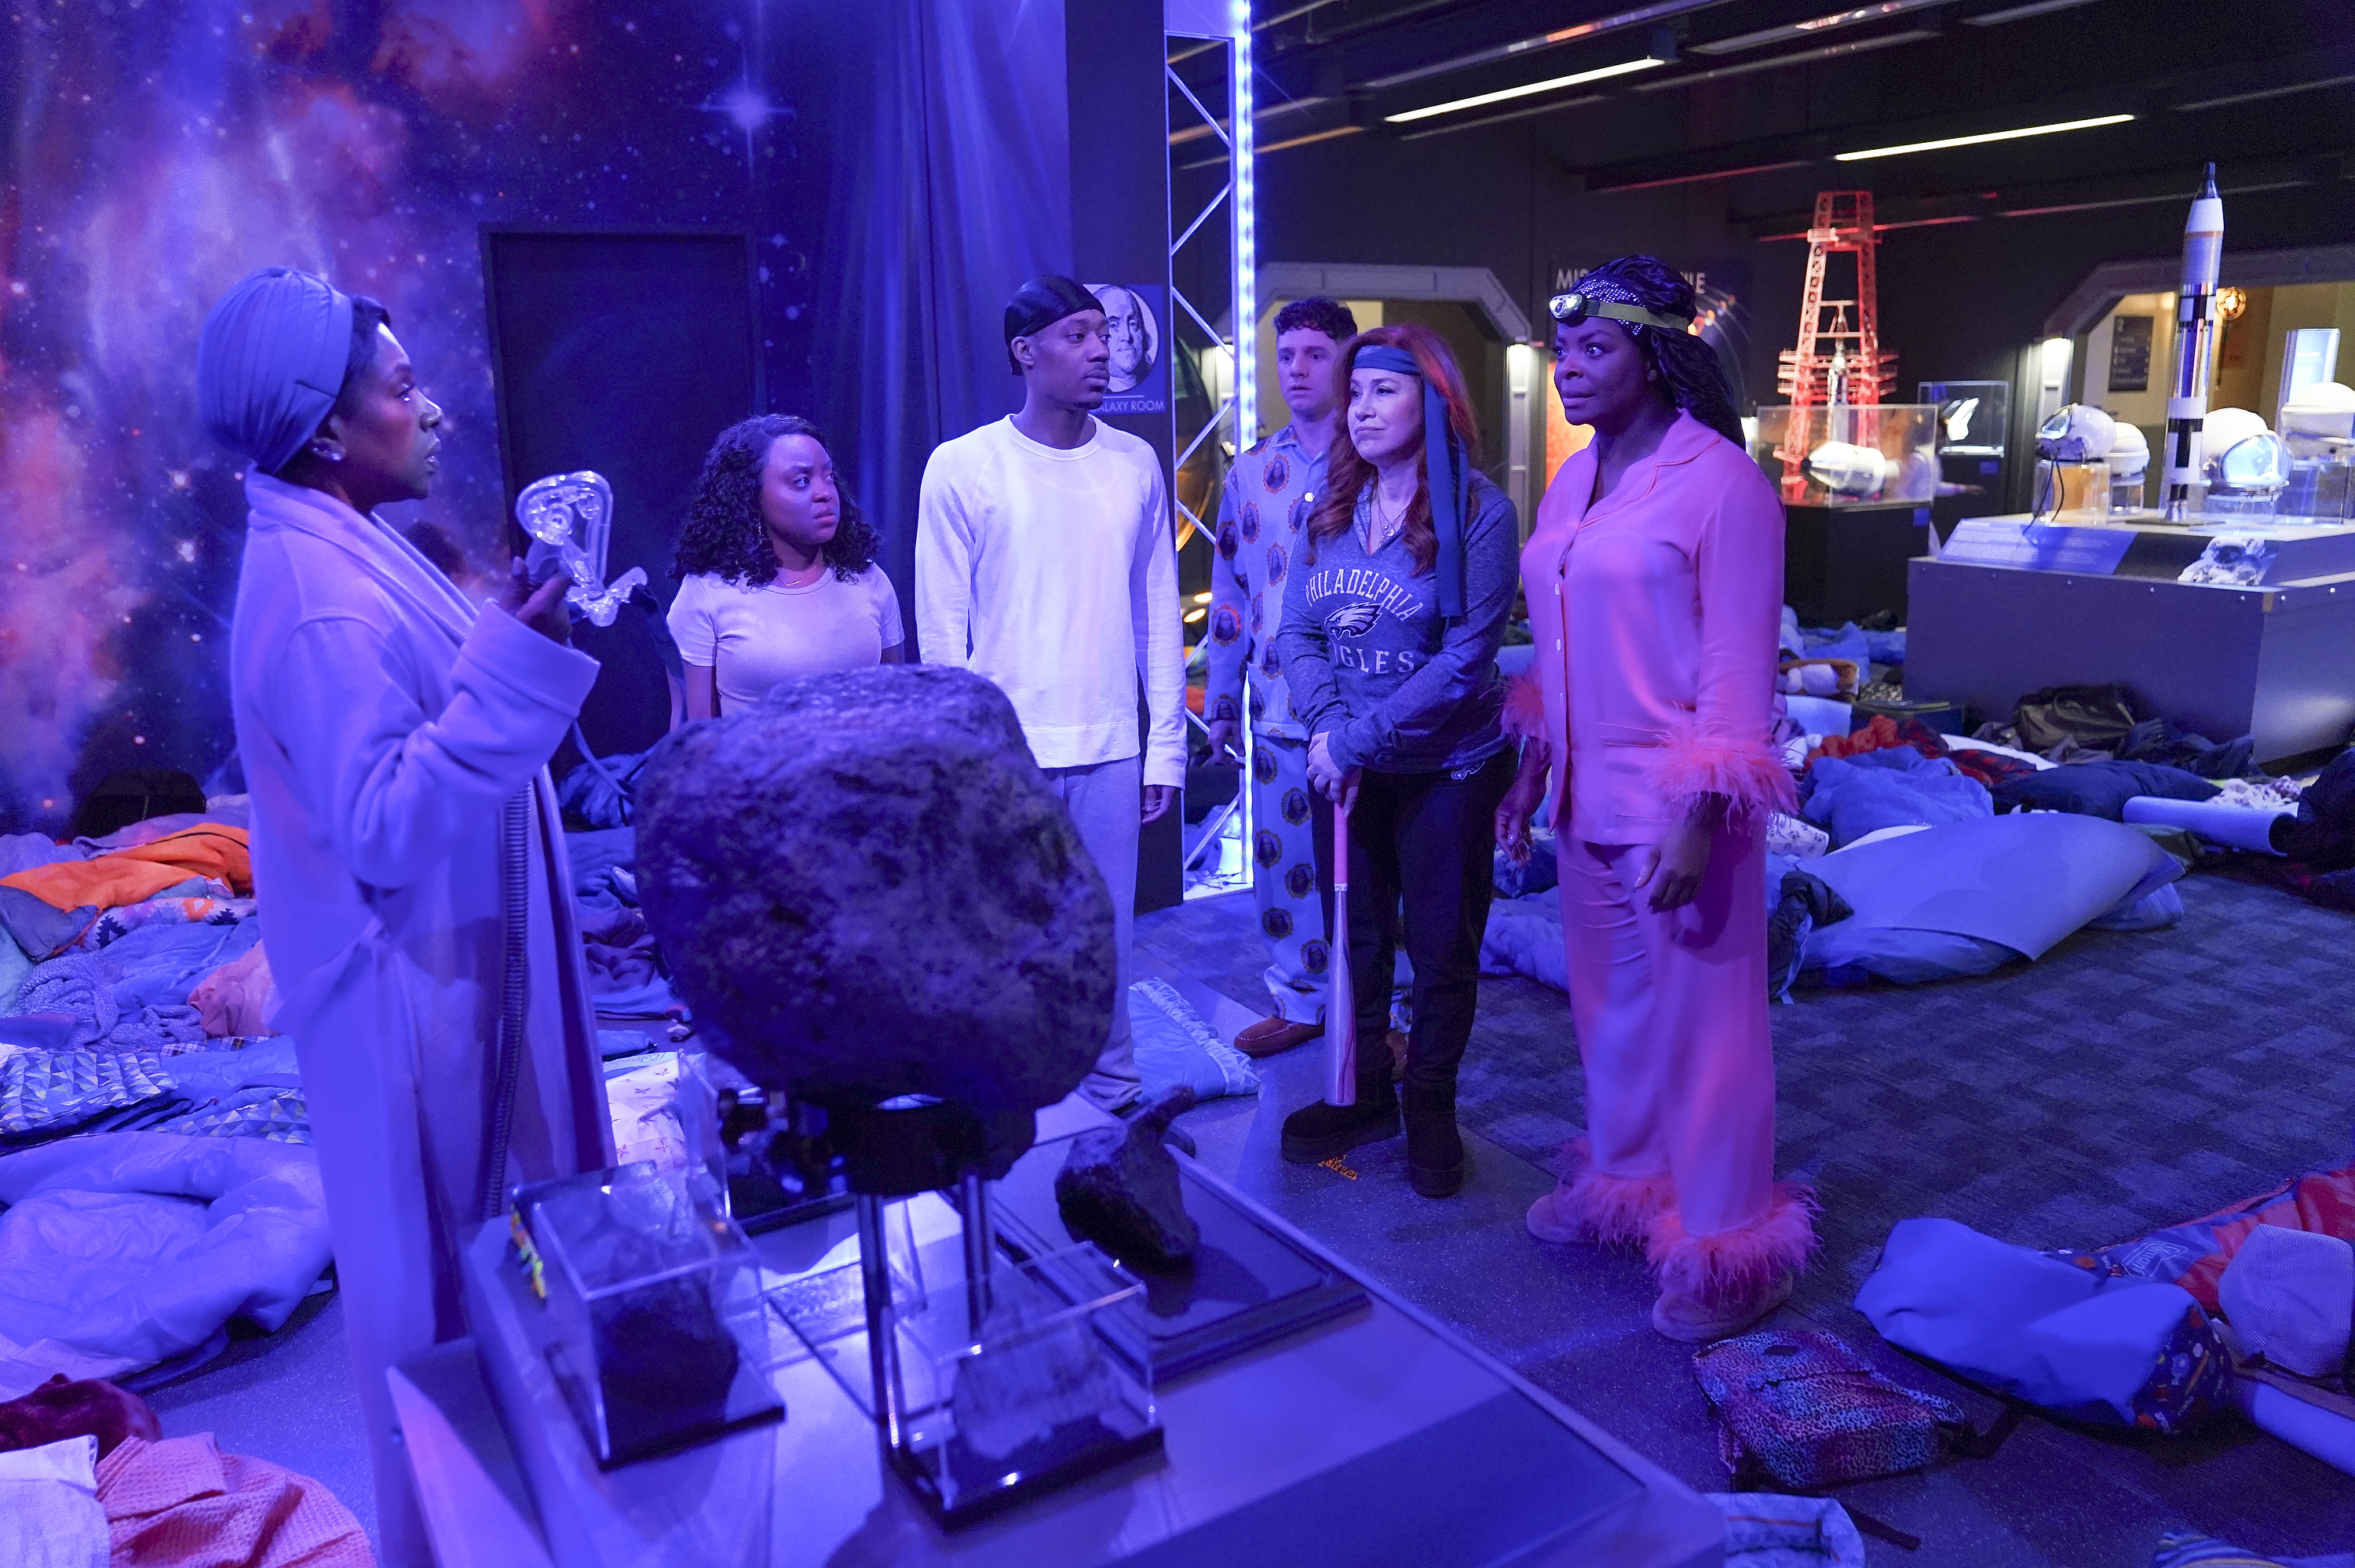 Abbott Elementary teachers in their nightwear gathered in the Galaxy Room at the Franklin Institue on the season two finale of "Abbott Elementary." | Source: Getty Images